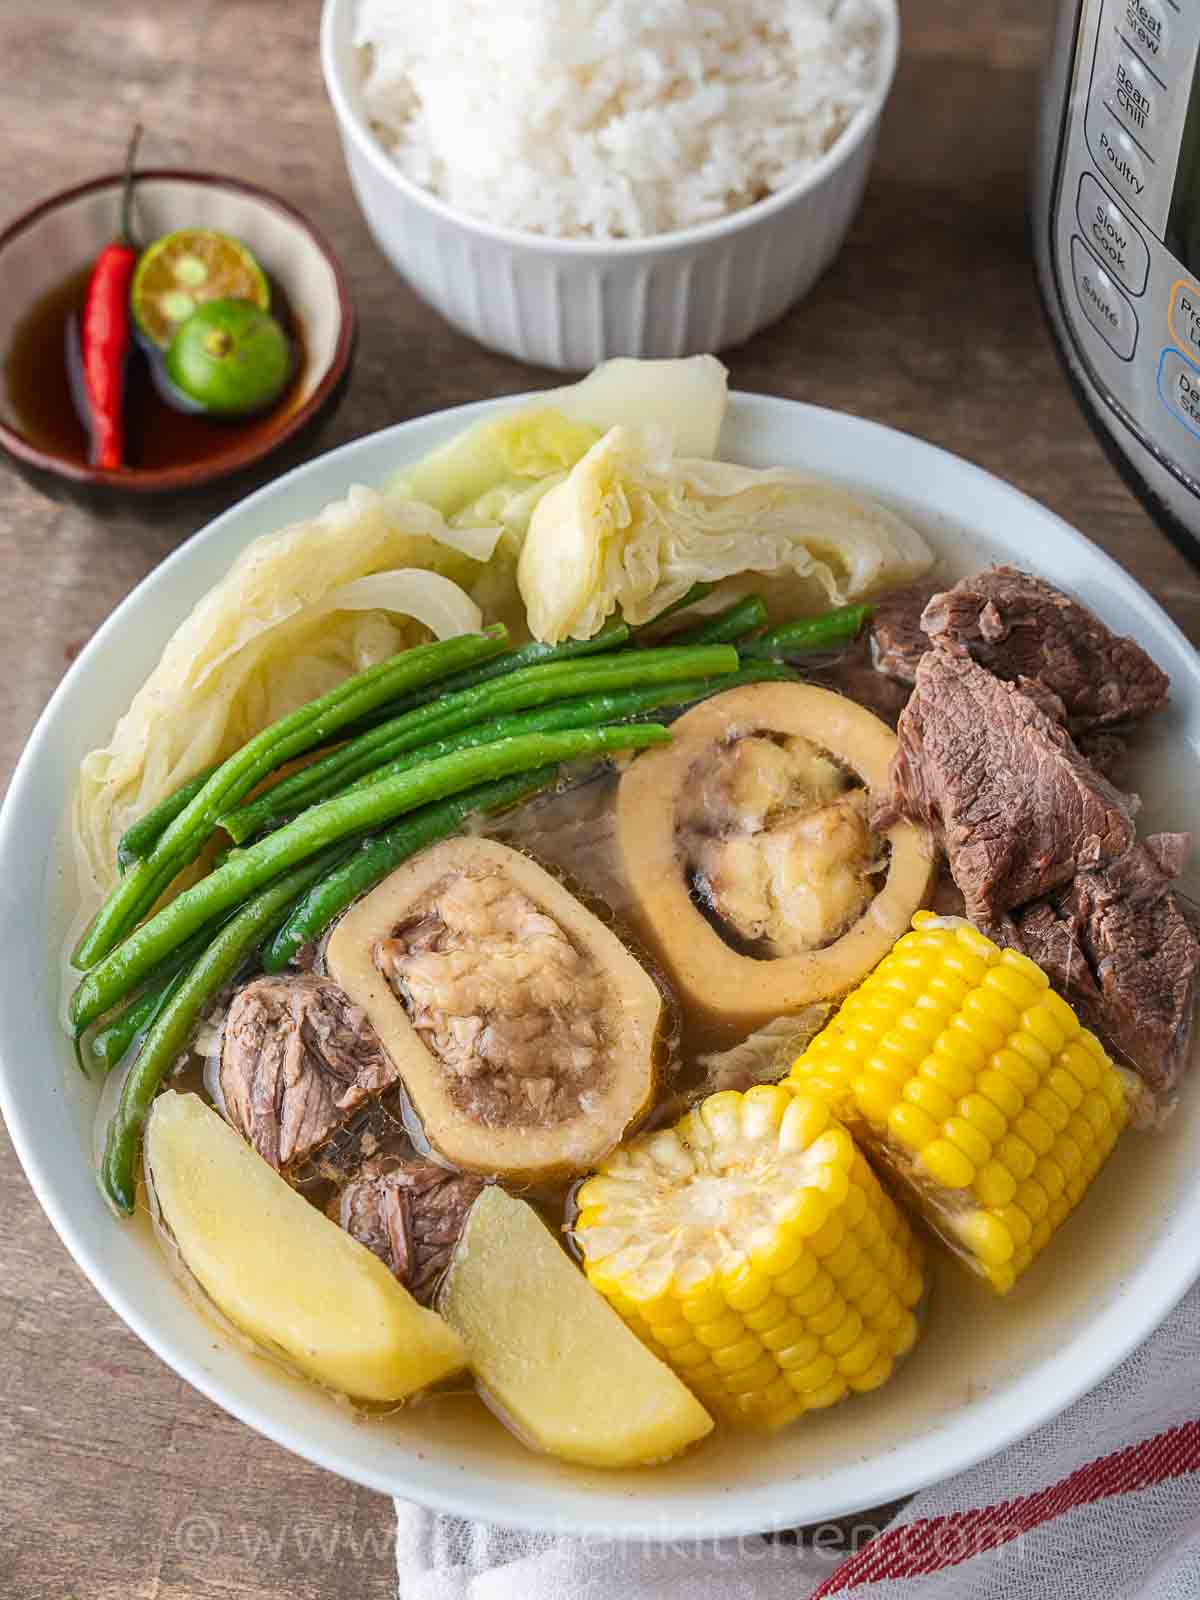 nilagang baka or bulalo recipe with vegetables, and corn on the cub.